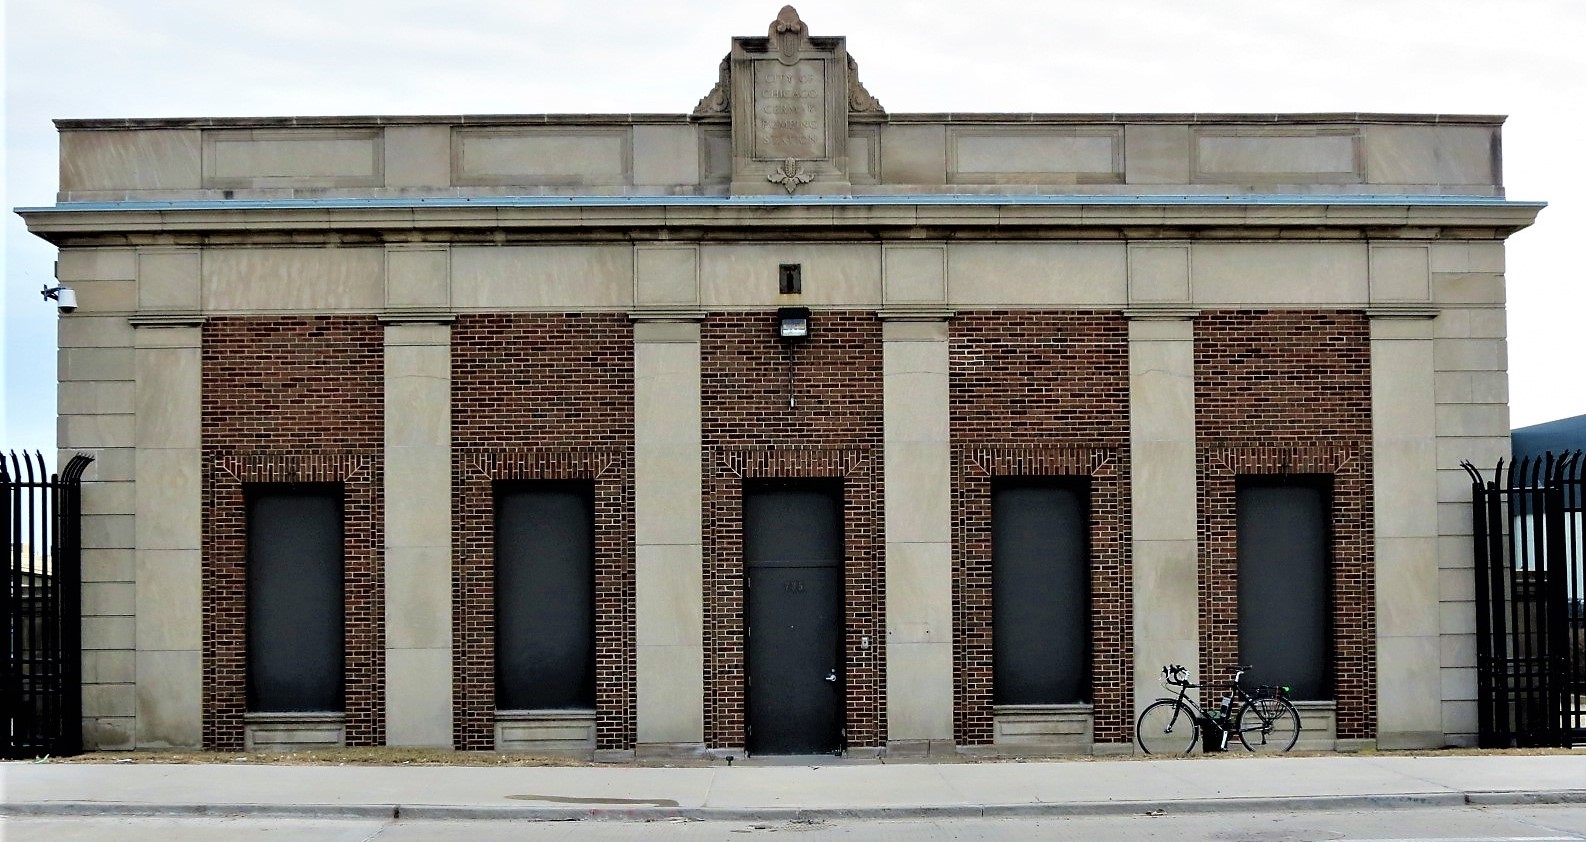 A tour bicycle leaning on red brick white stone Cermak Pumping Station